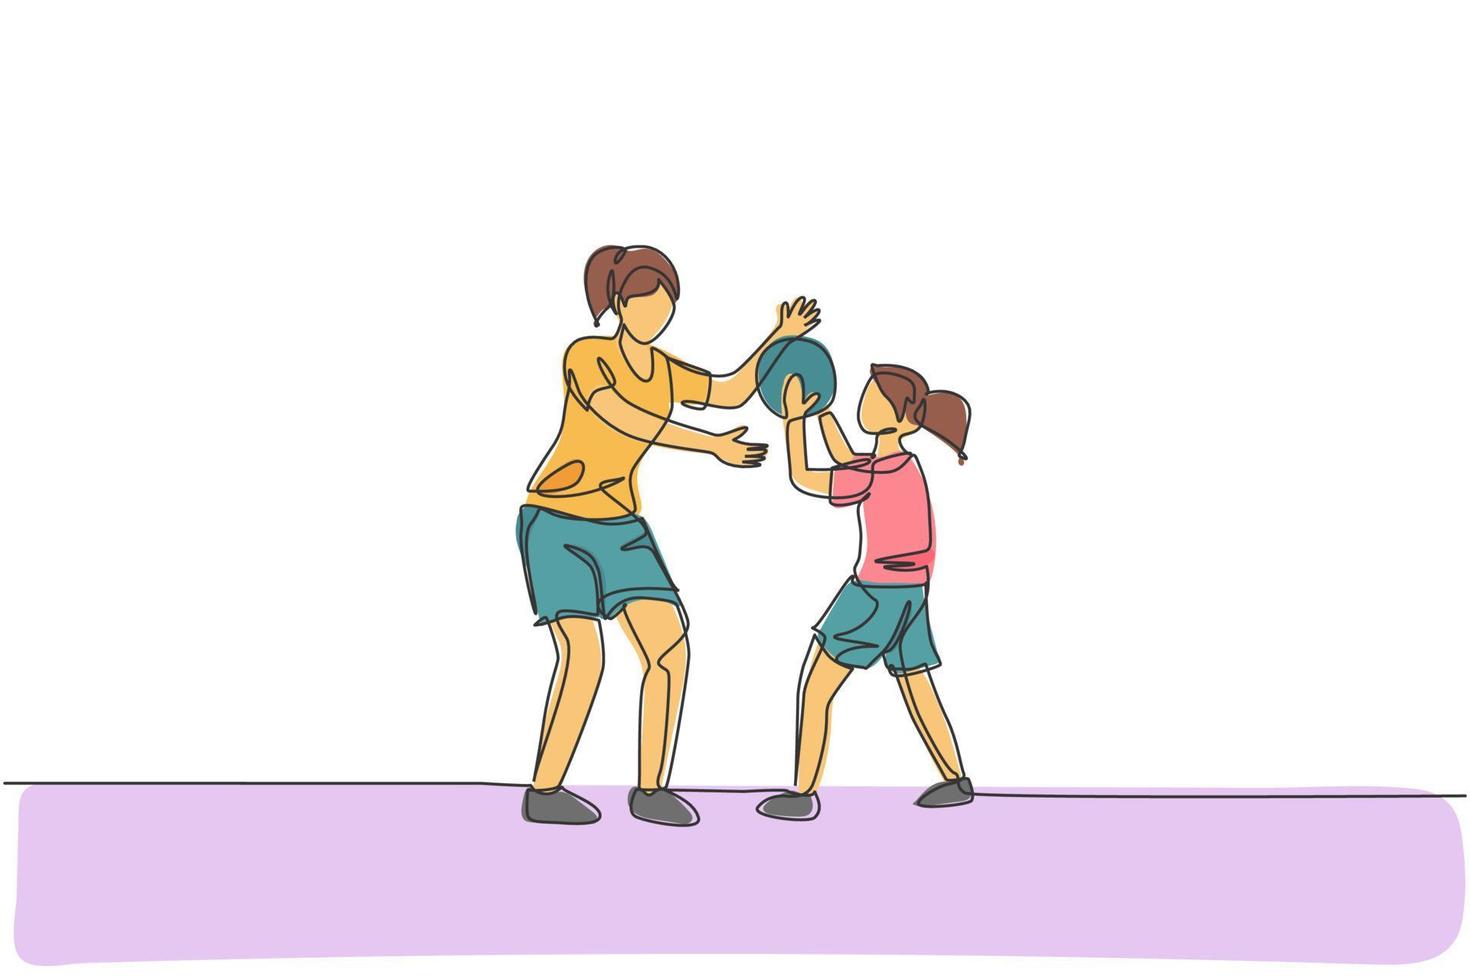 One single line drawing of young mother playing basketball fun with her daughter at home field vector illustration. Happy parenting learning concept. Modern continuous line graphic draw design